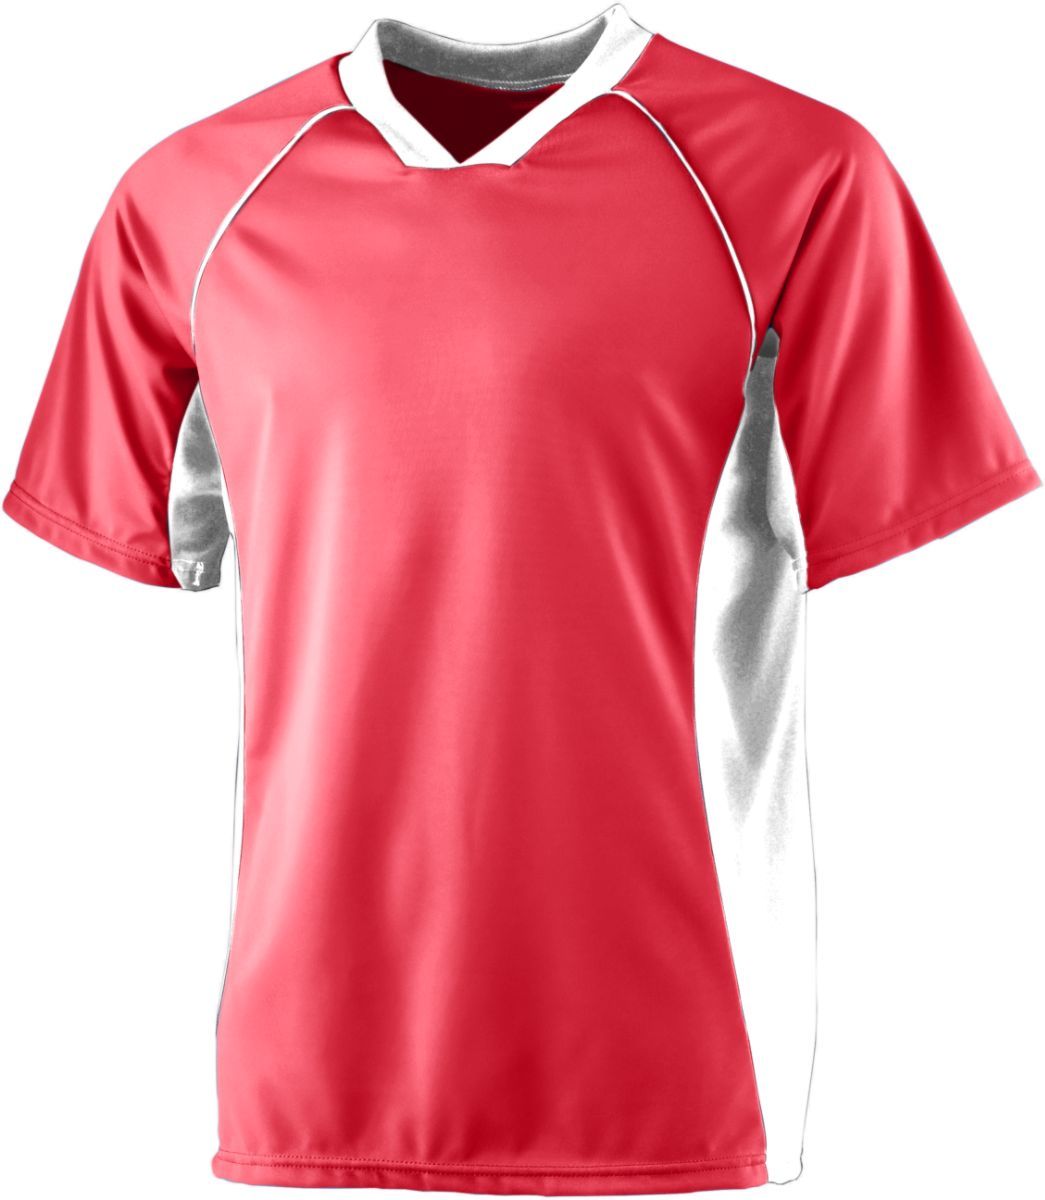 Augusta Sportswear Youth Wicking Soccer Jersey in Red/White  -Part of the Youth, Youth-Jersey, Augusta-Products, Soccer, Shirts, All-Sports-1 product lines at KanaleyCreations.com